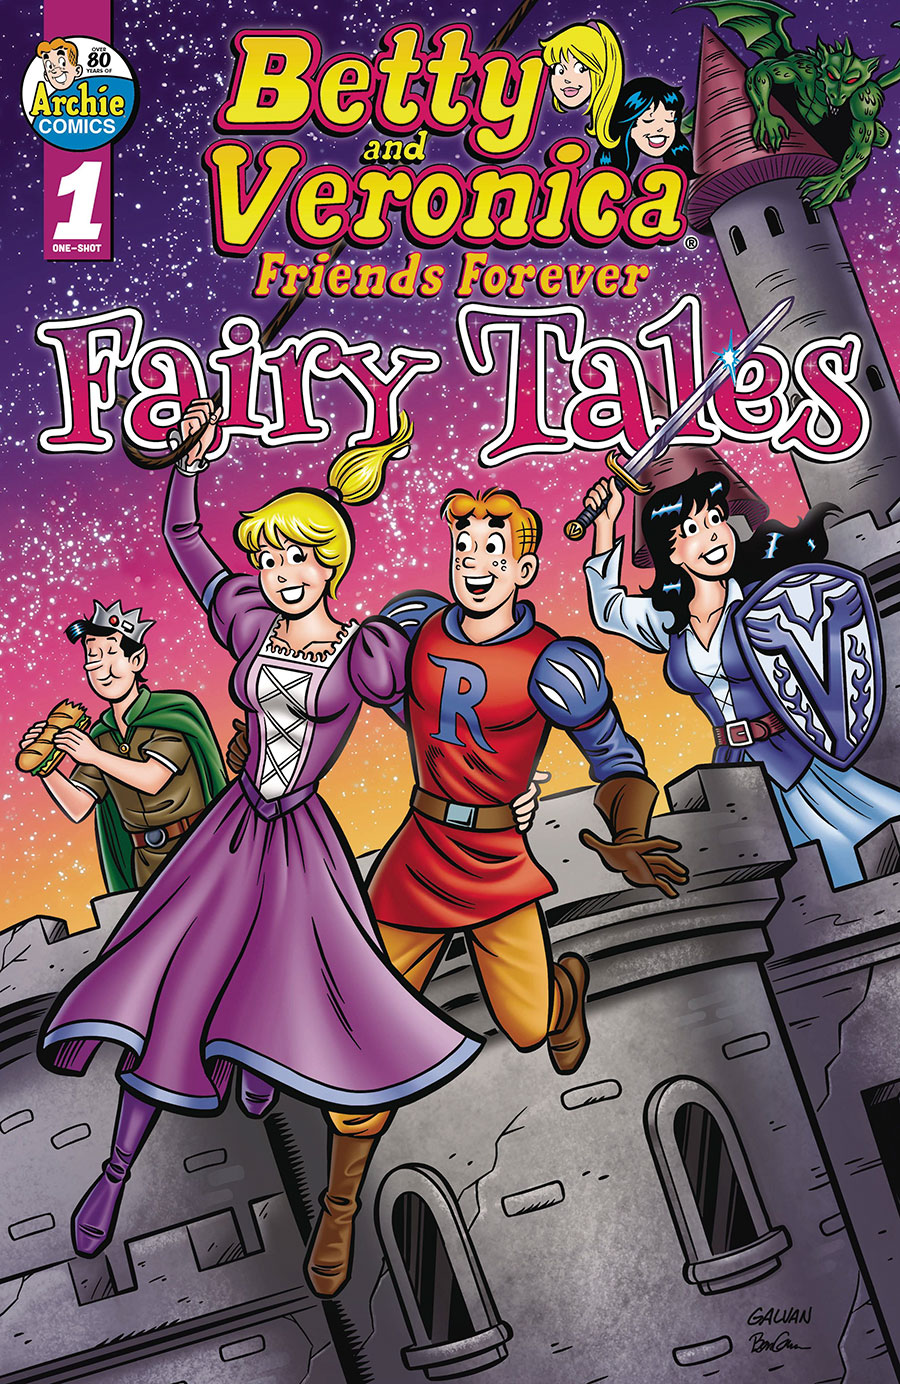 Betty And Veronica Friends Forever Fairy Tales #1 (One Shot)